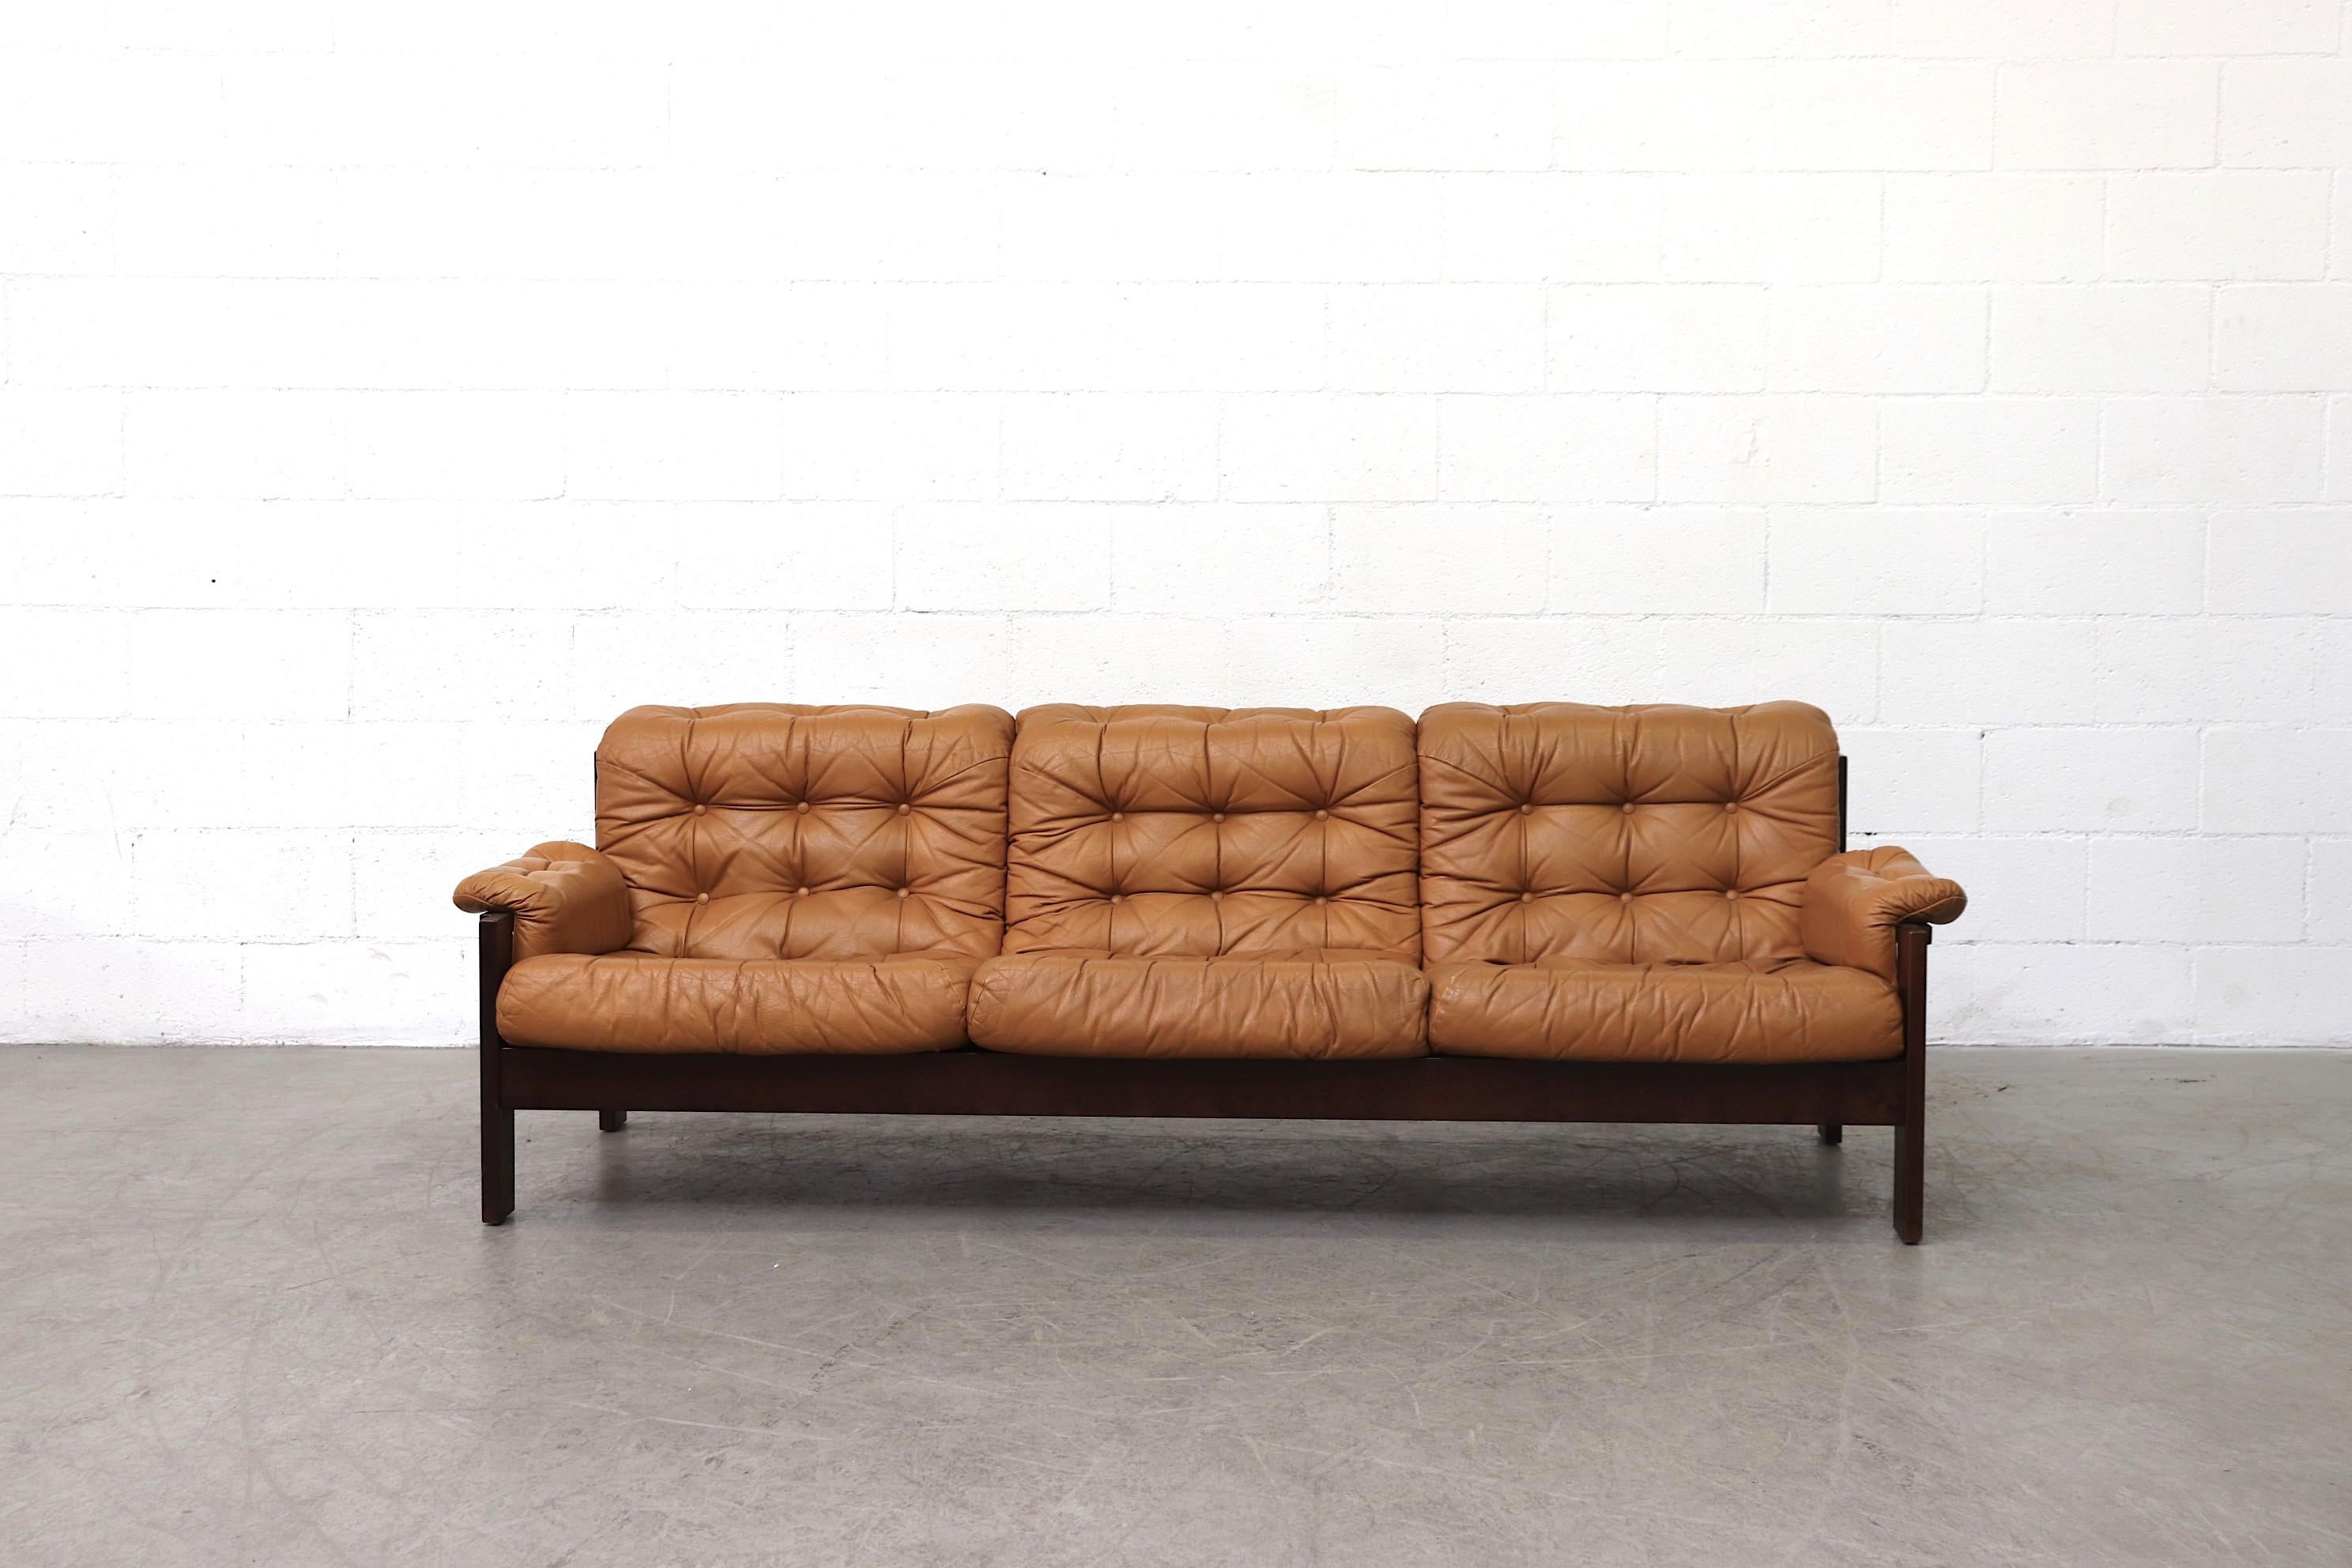 Mid-Century Modern Arne Norell Inspired Butterscotch Tufted Leather Sofa for llums Bolighus